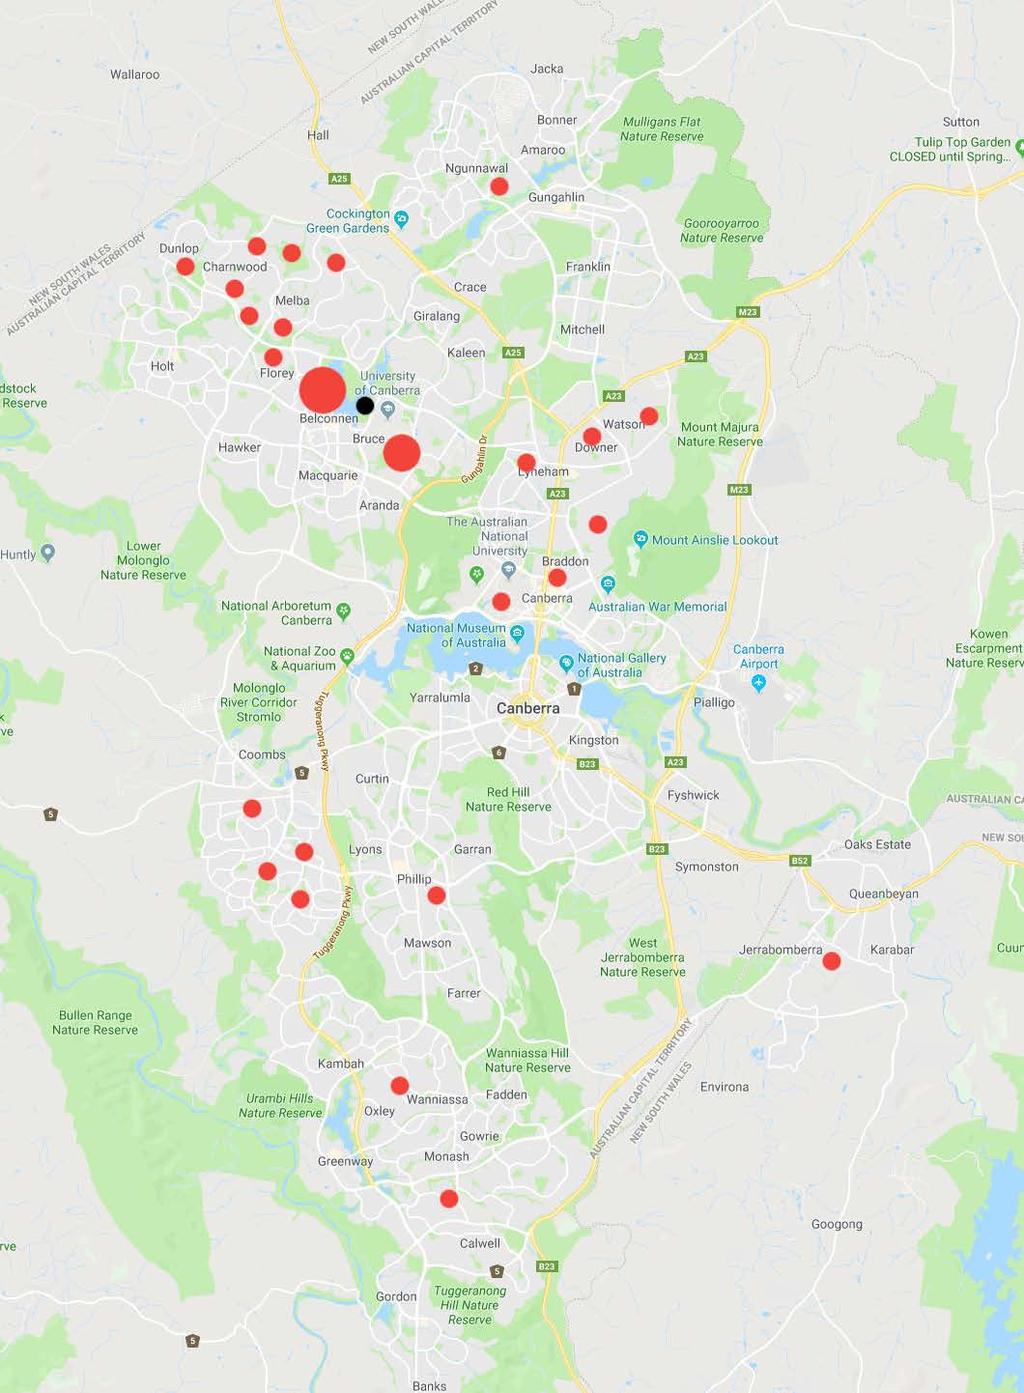 VISITOR PROXIMITY TO JOHN KNIGHT PLAYGROUND While the majority of visitors to John Knight Playground live on the north side of Canberra, respondents come from across the region to spend time at this